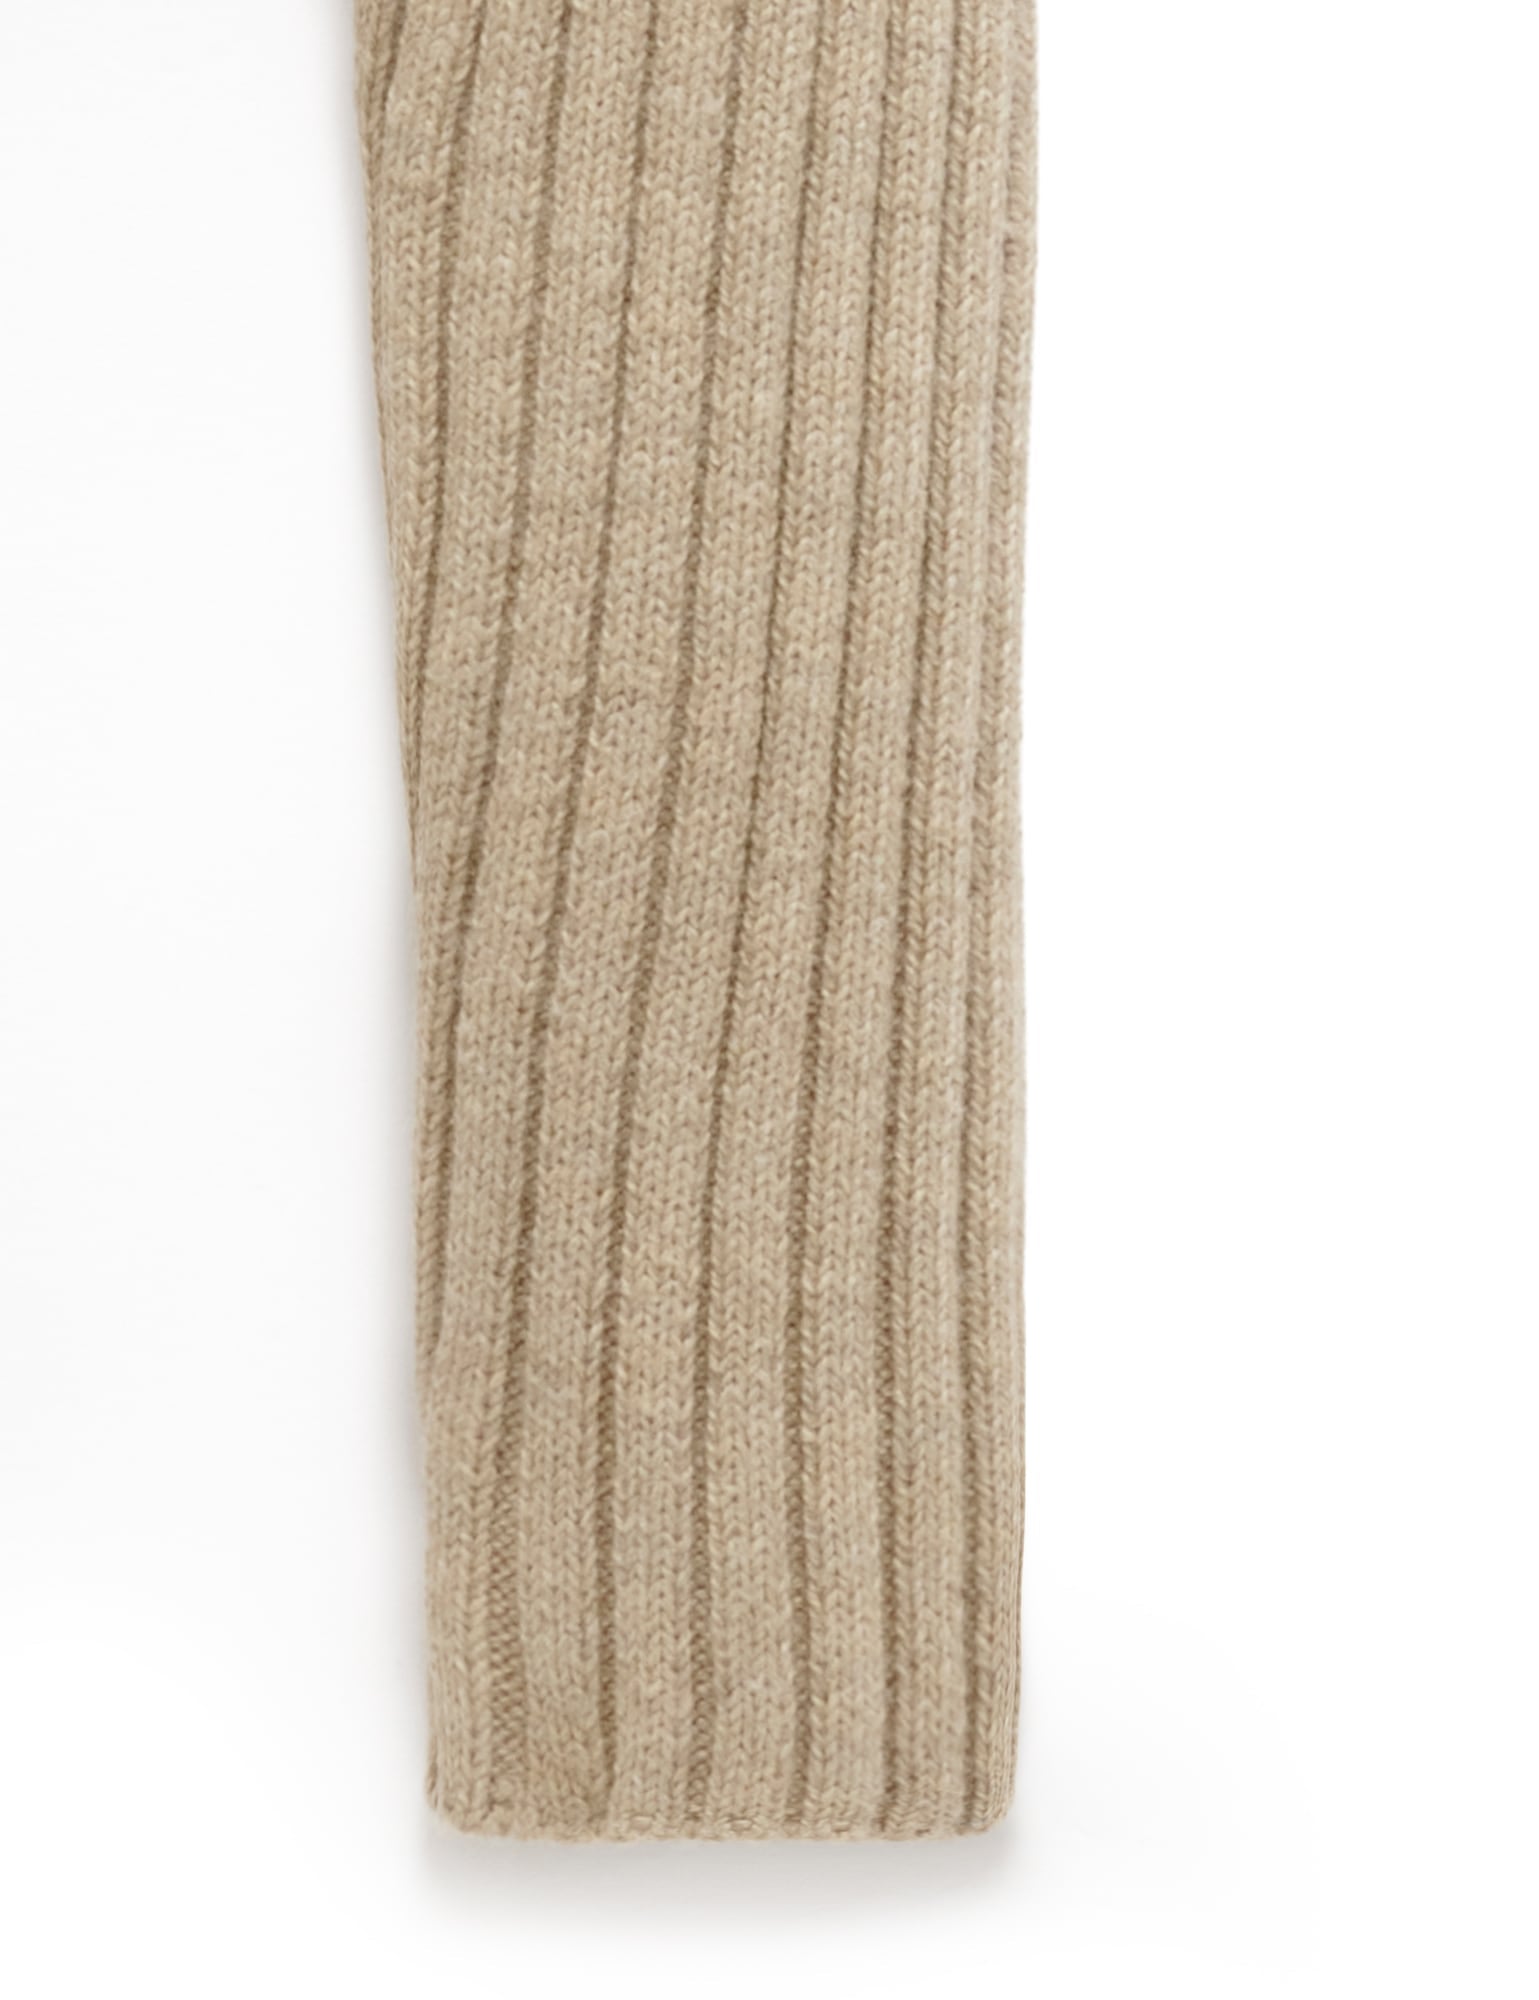 Leggings Cream Ribbed Knit – Busy Bees